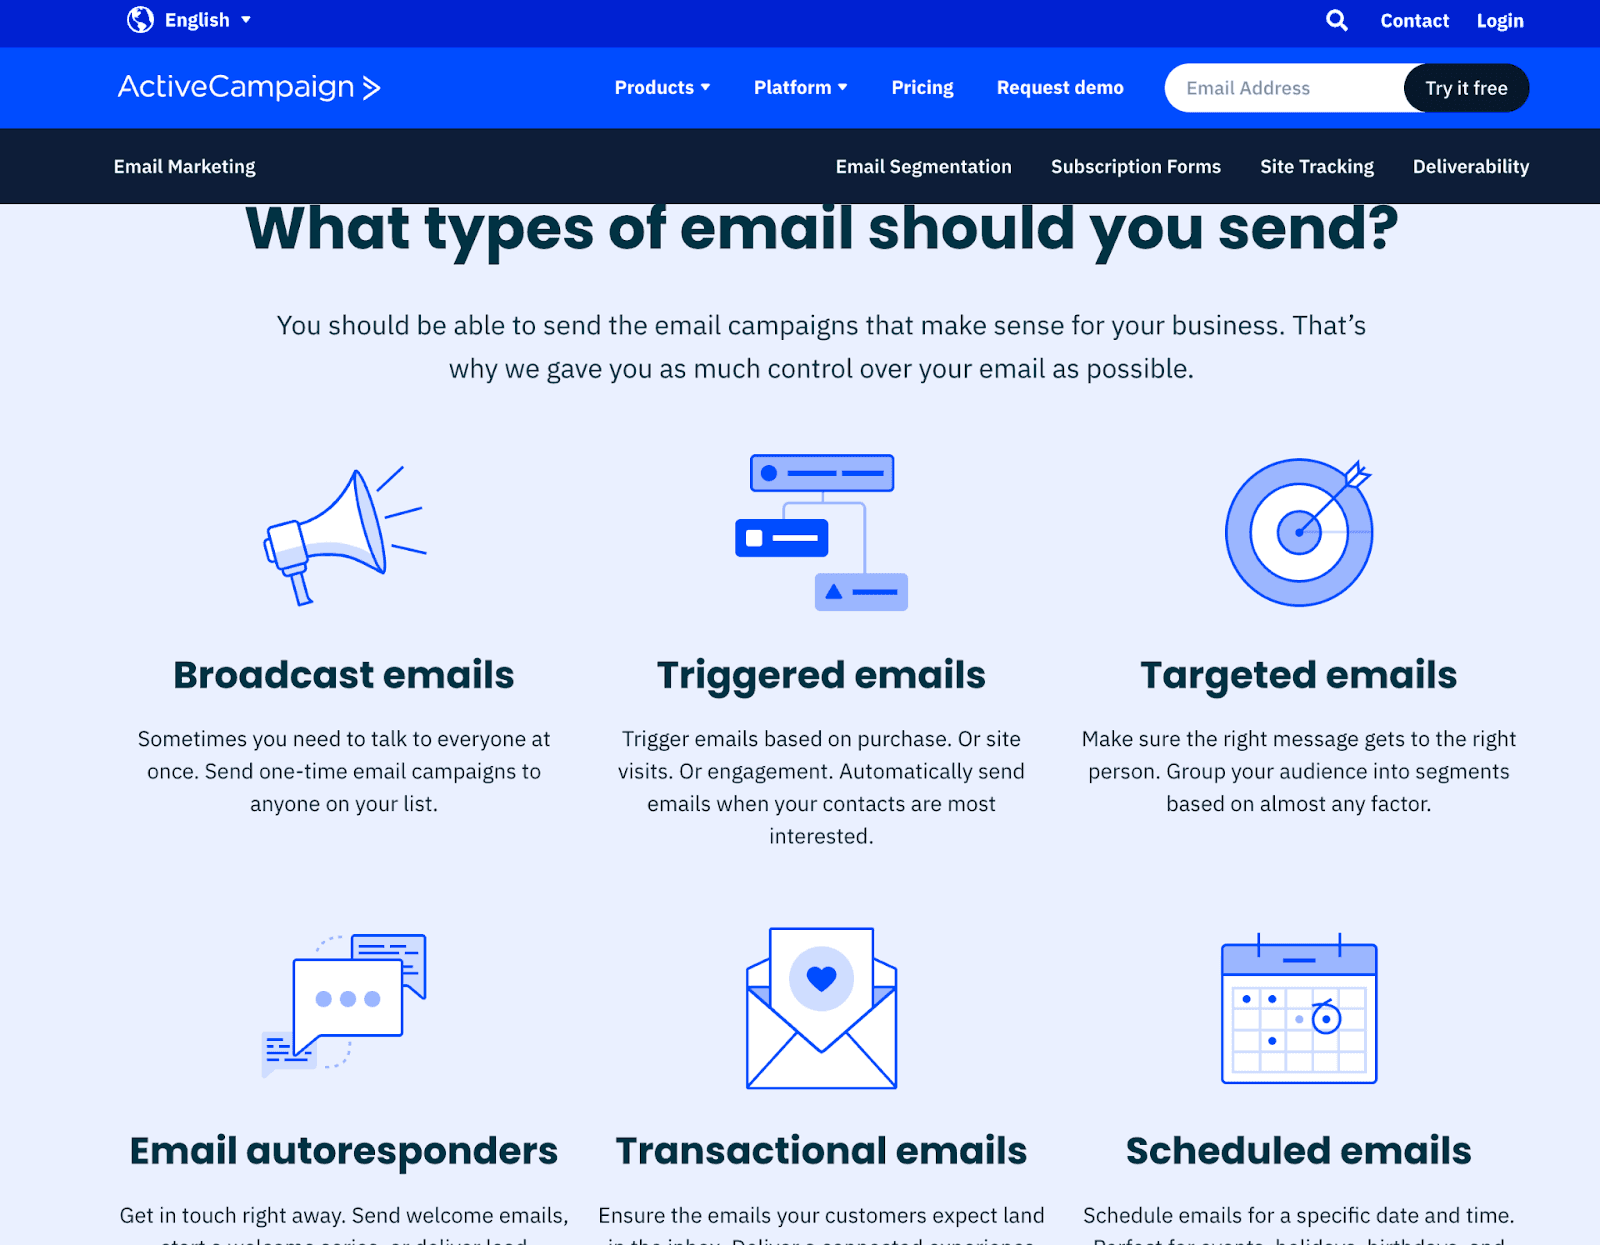 ActiveCampaign types of email to send